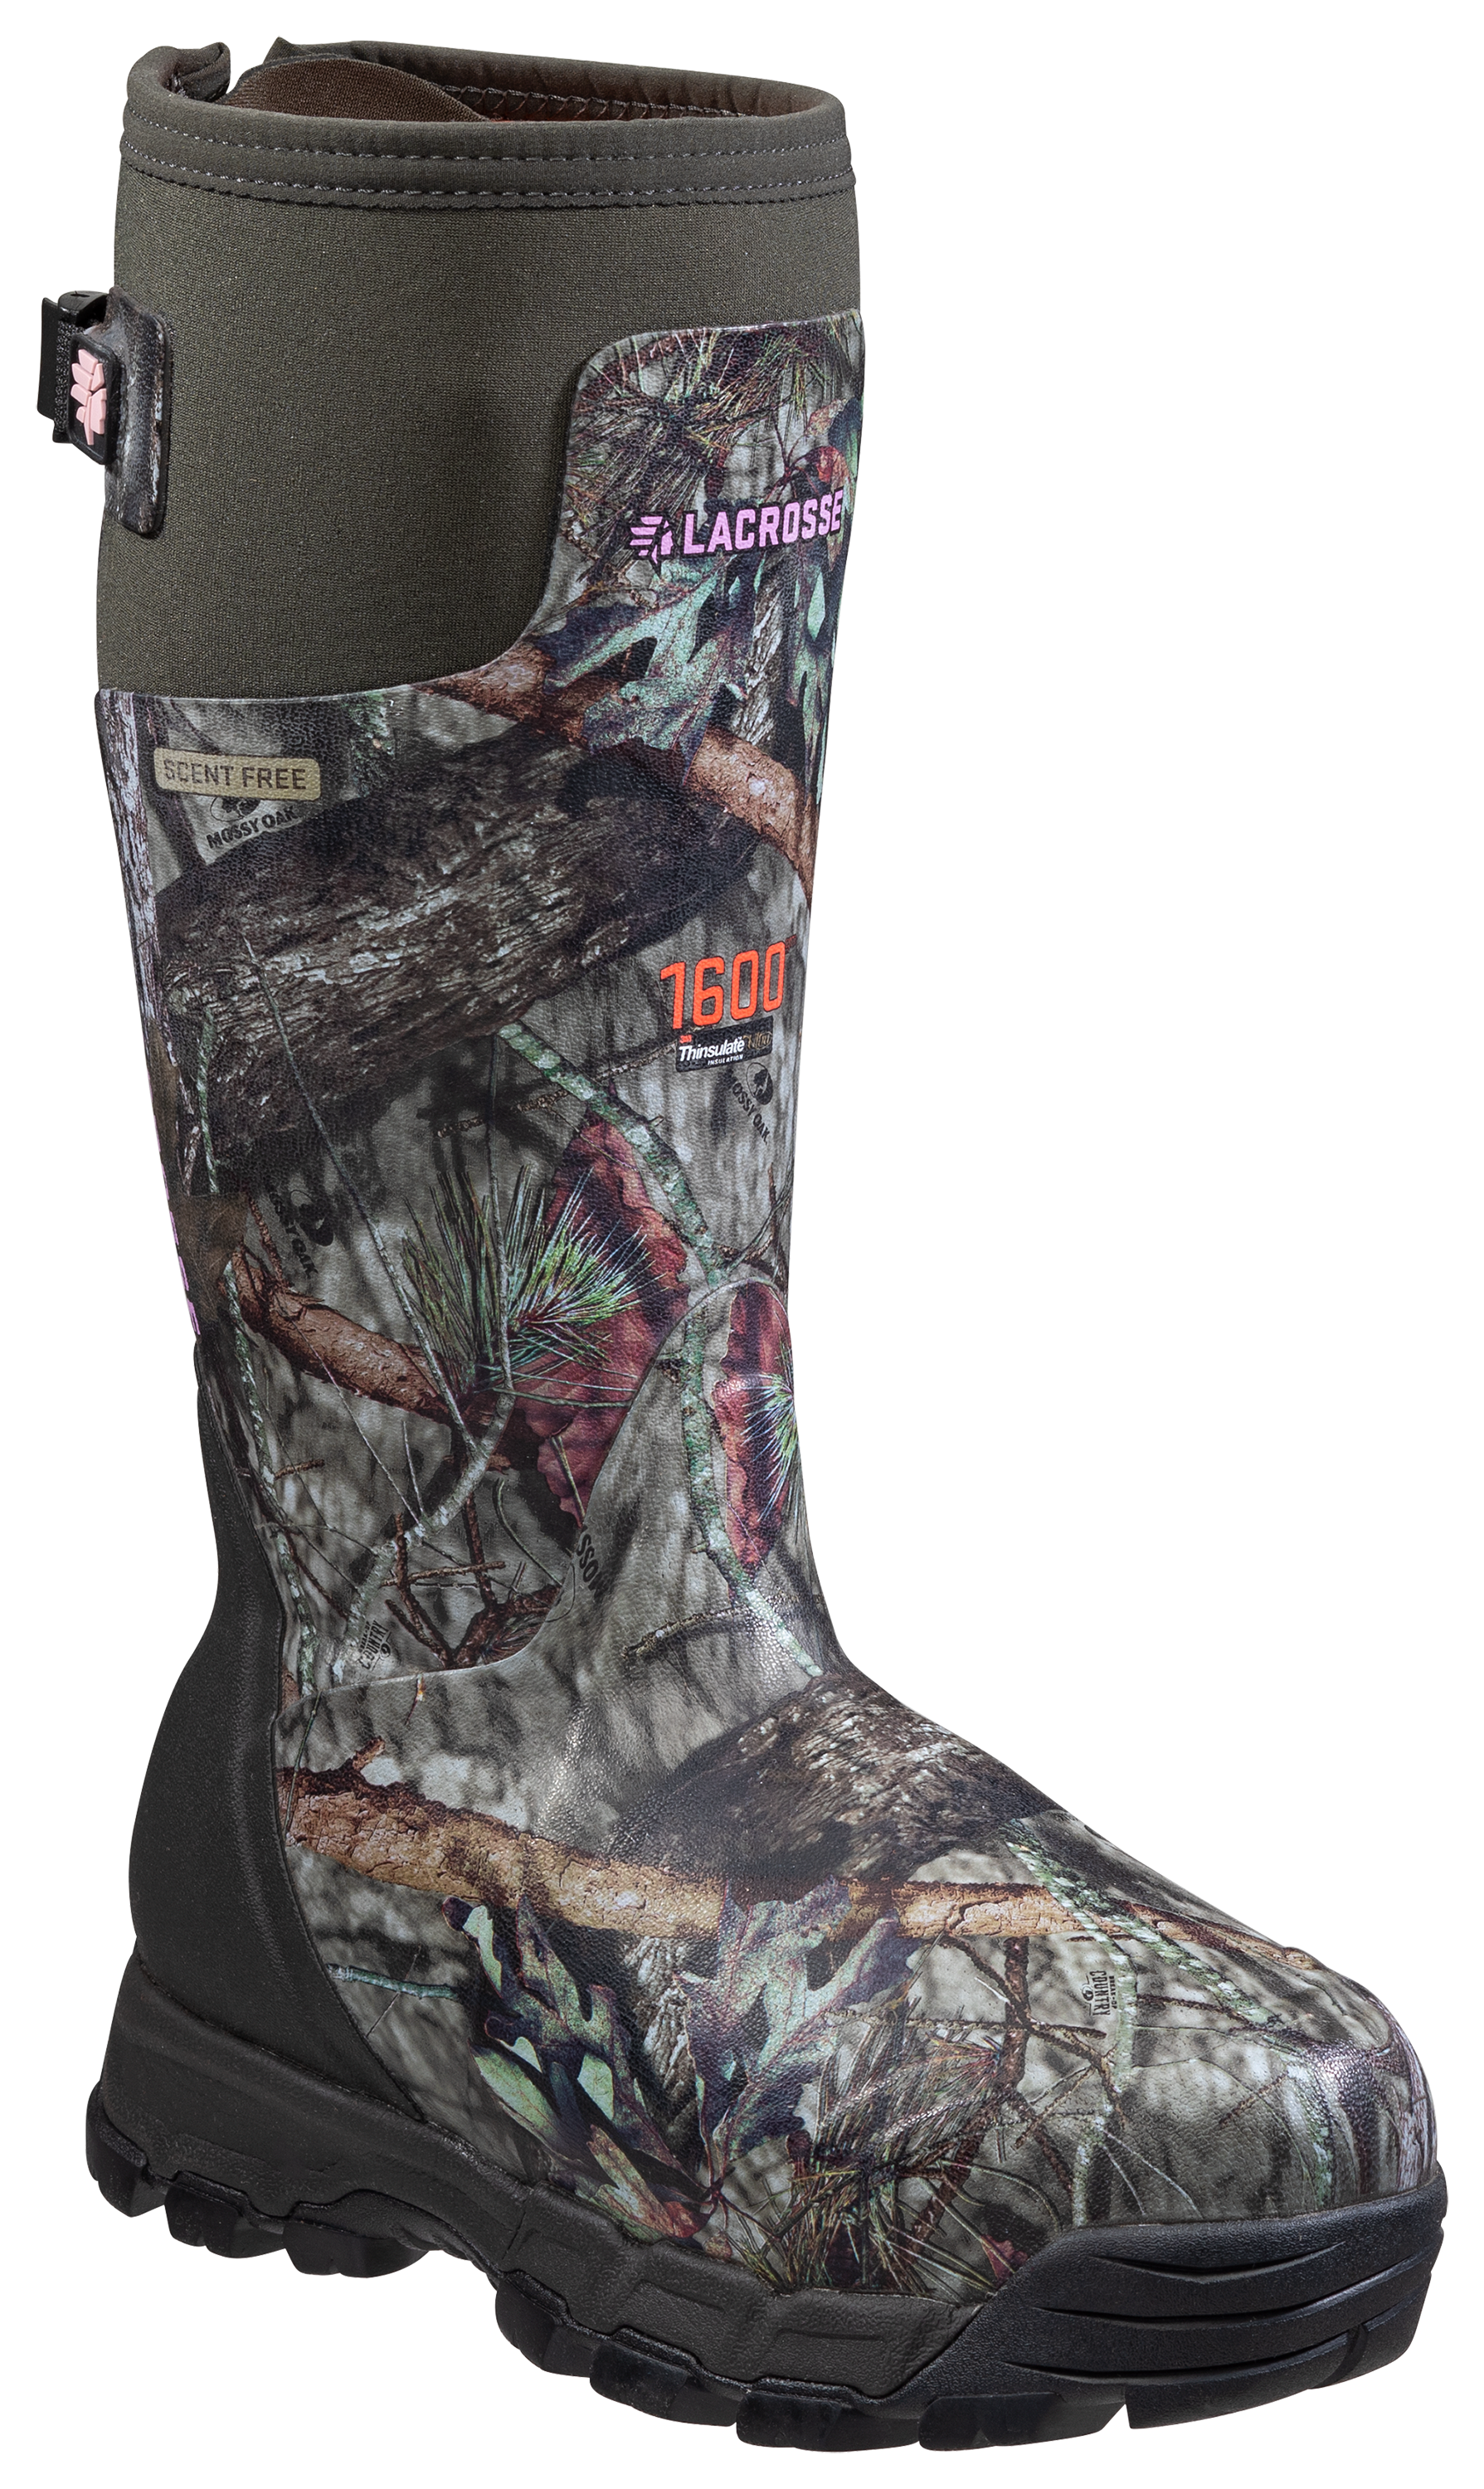 LaCrosse AlphaBurly Pro 1,600 Insulated Hunting Boots for Ladies